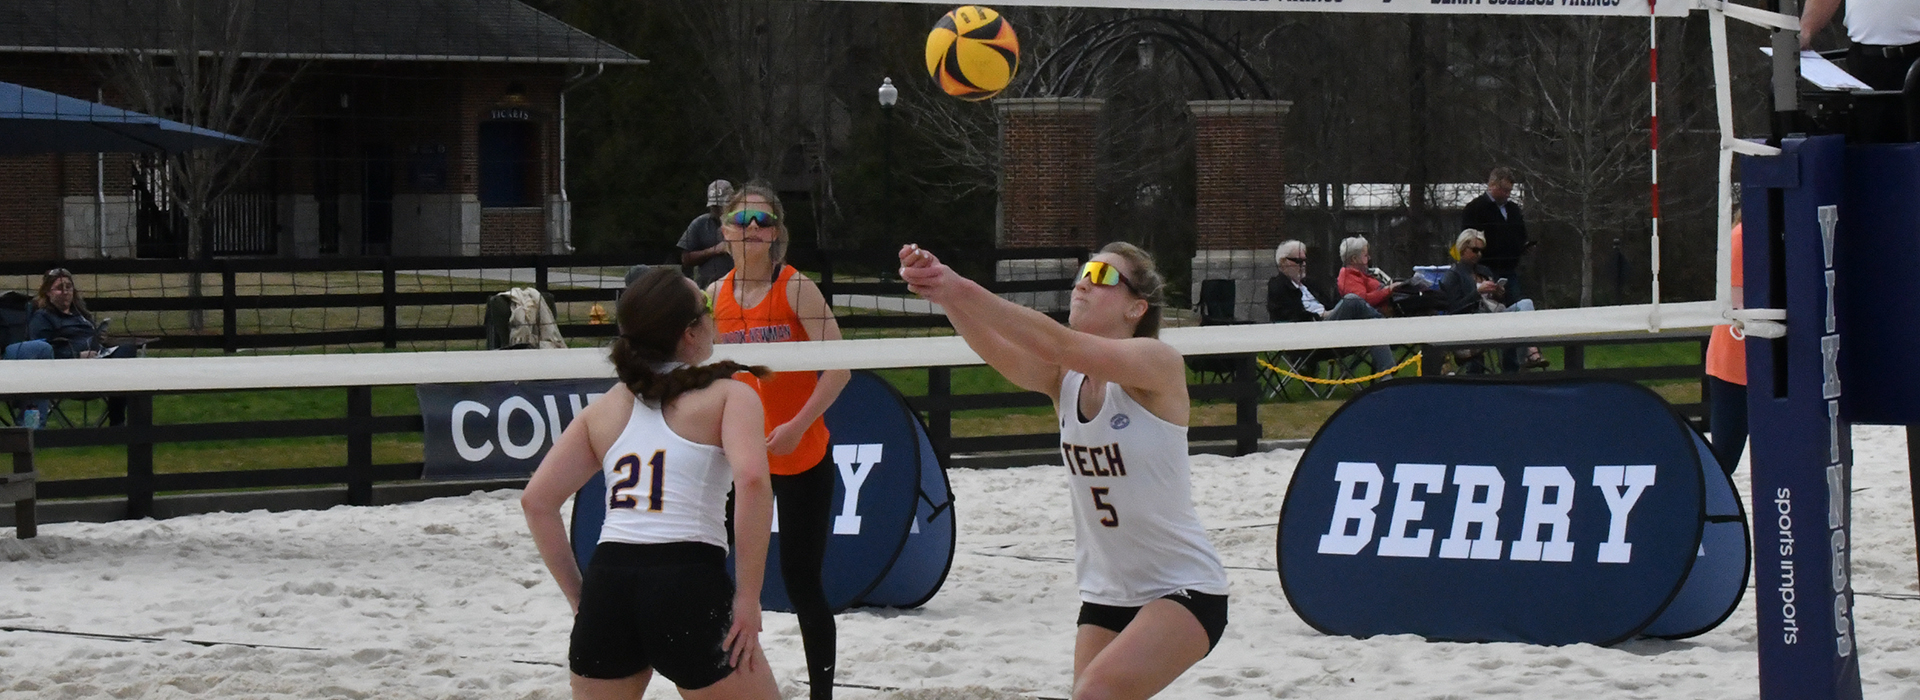 Tech splits on day two of Berry College Tournament to finish first beach weekend 2-2